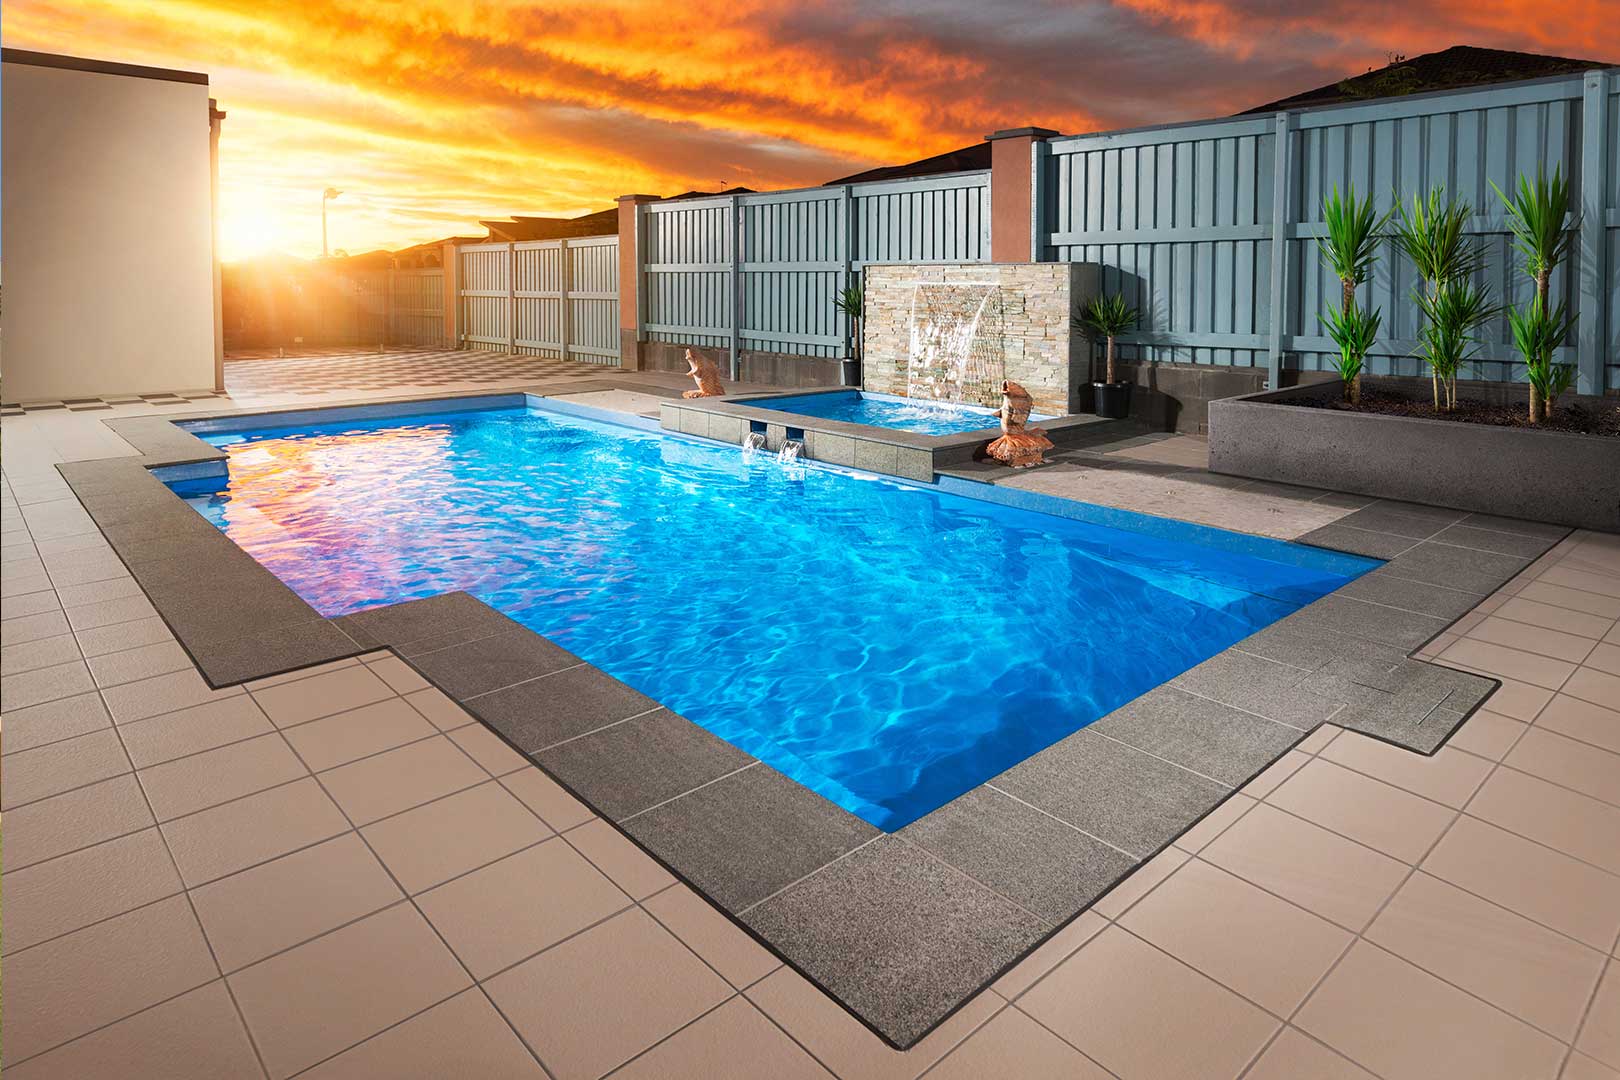 5 Reasons To Buy A Pool In Winter